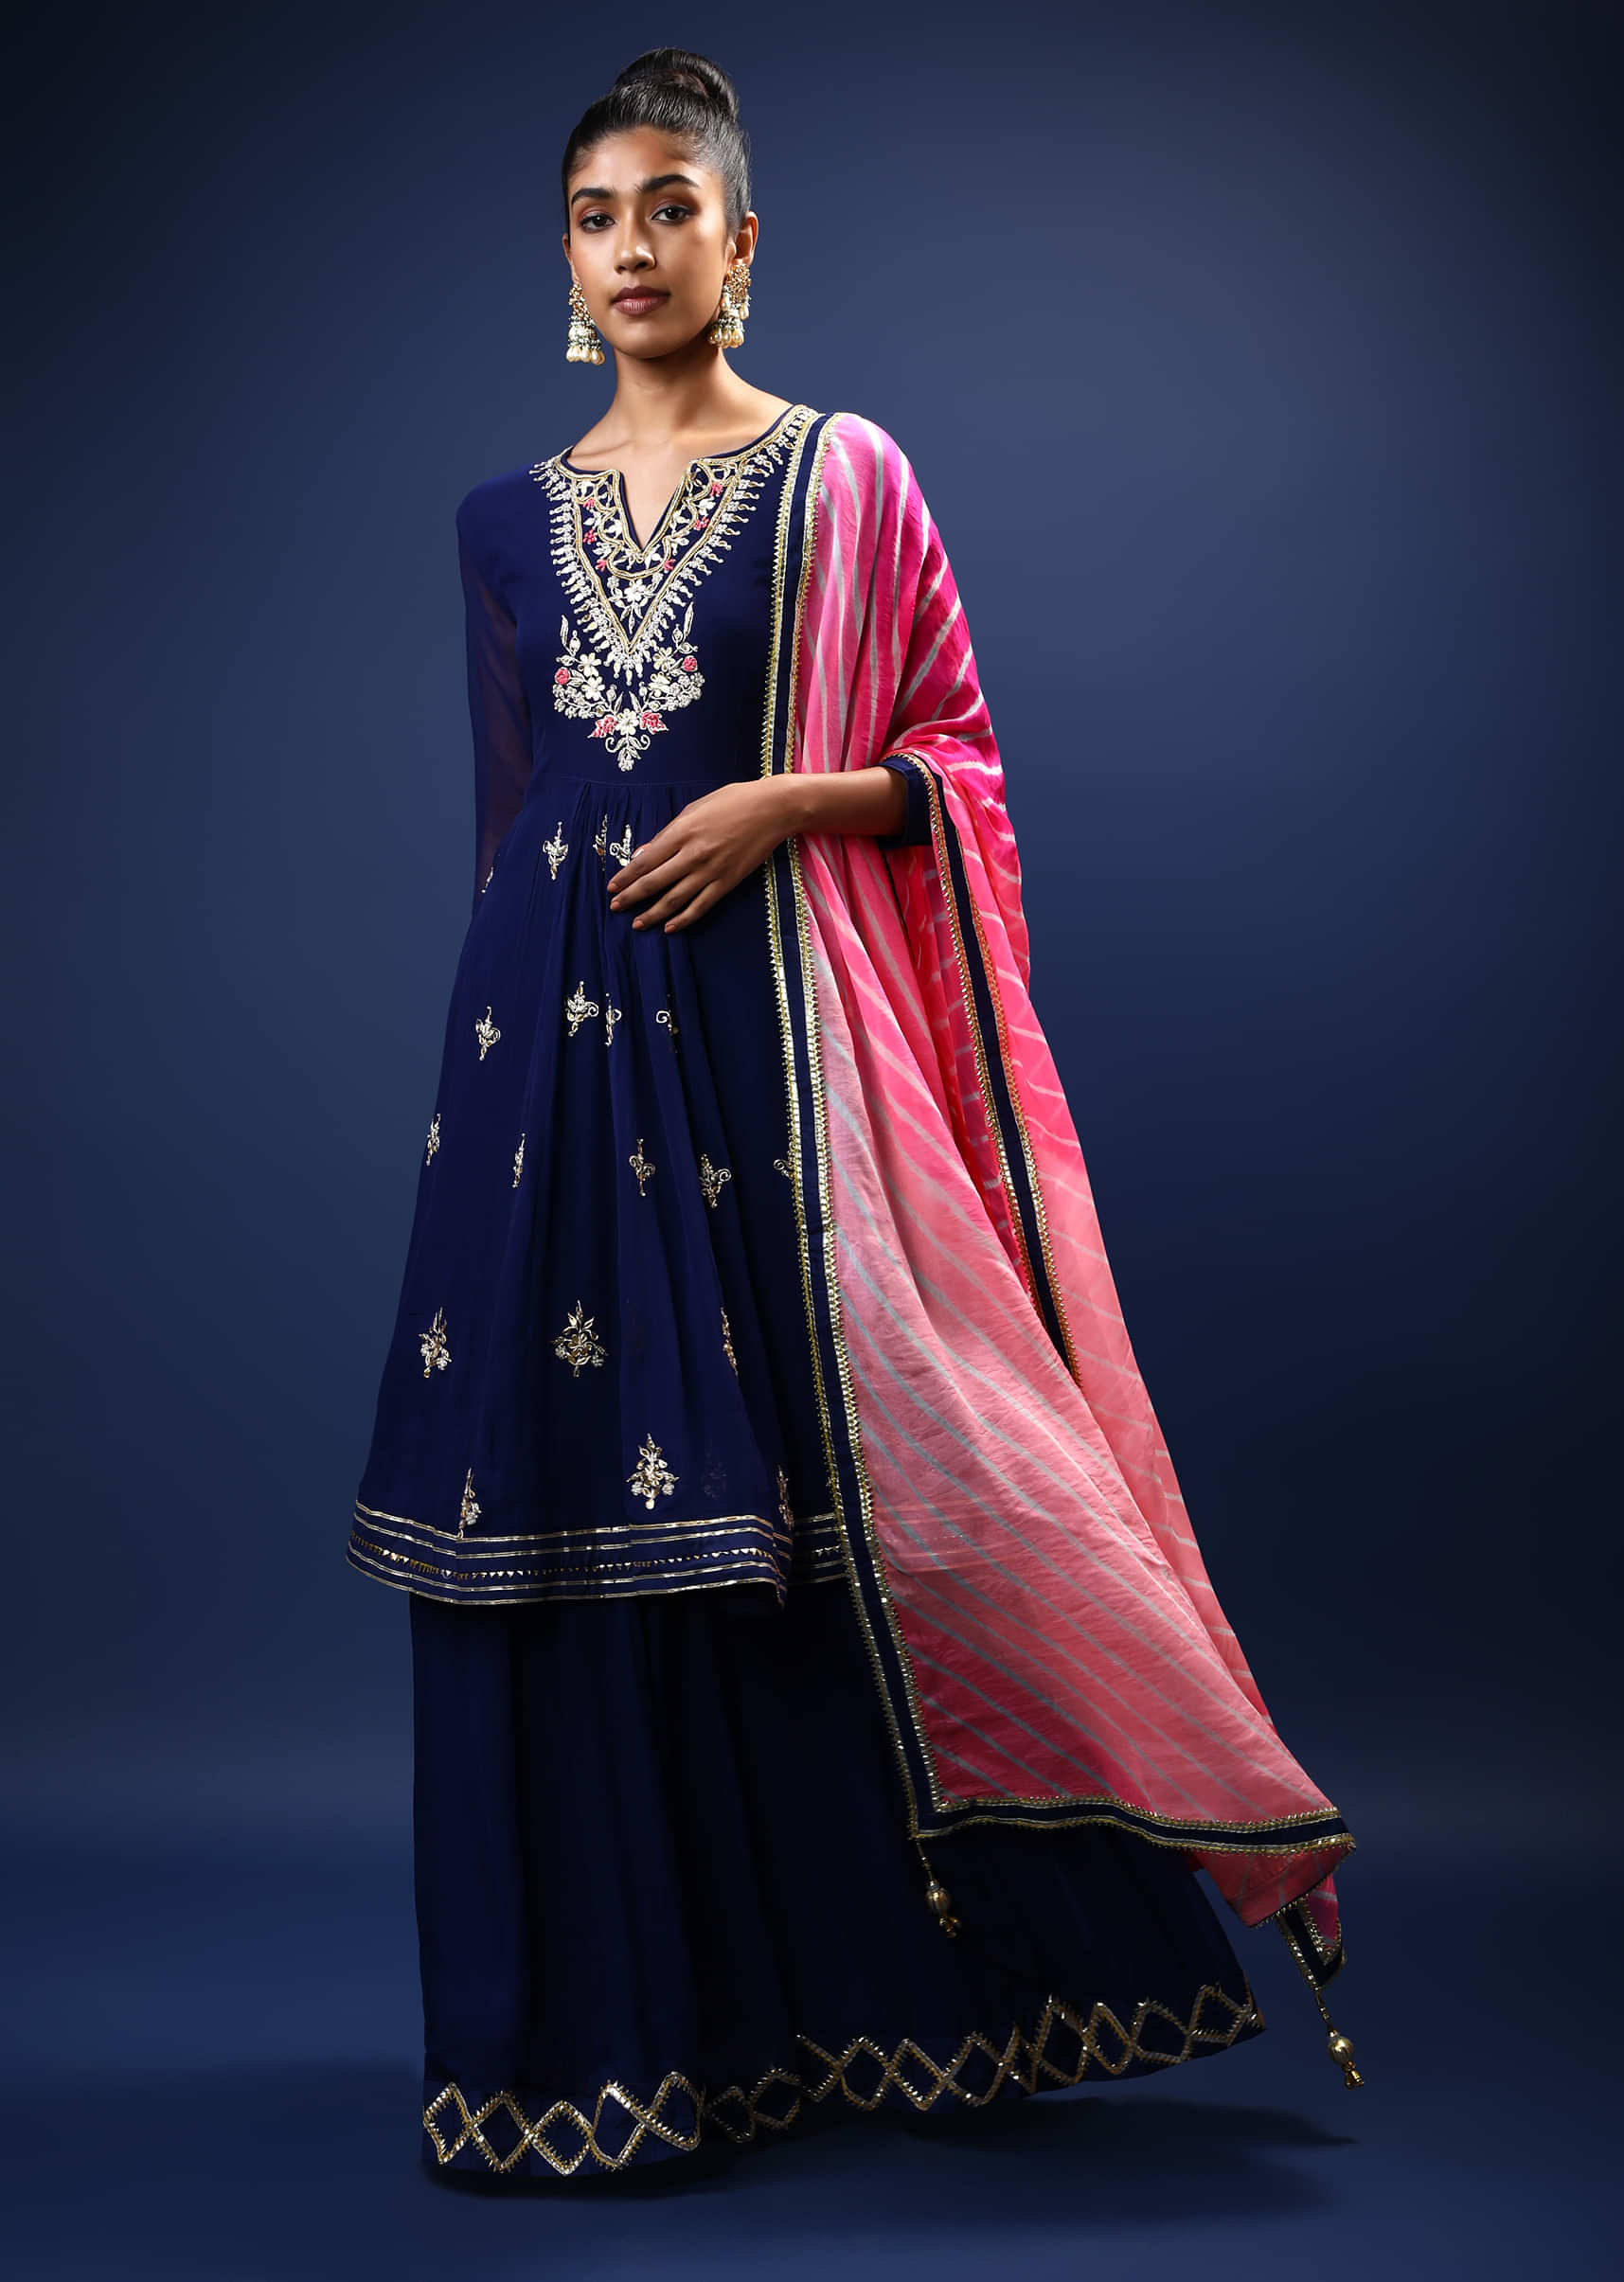 Navy Blue Skirt Suit With Pink Lehariya Printed Dupatta And A Flared Kurti With Gotta Patti And Zardosi Embroidered Floral Motifs  